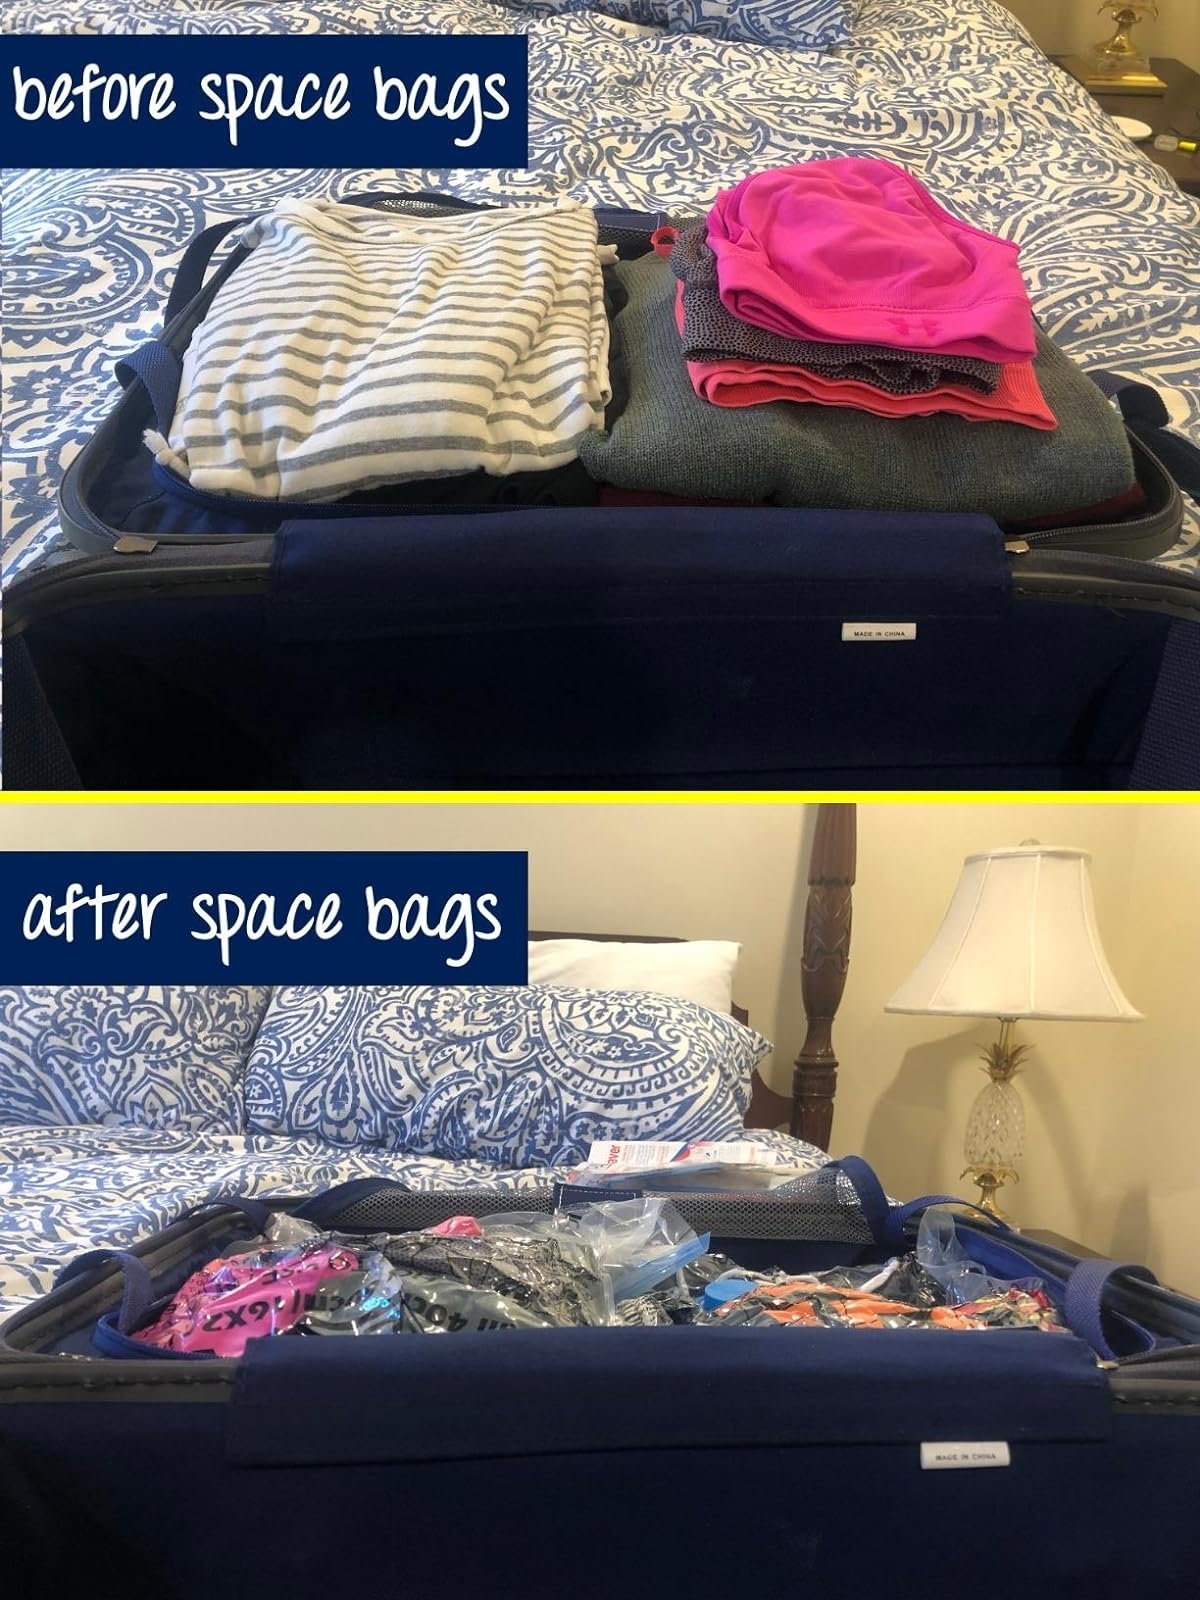 Open suitcase before and after using space-saving bags, showing increased packing capacity